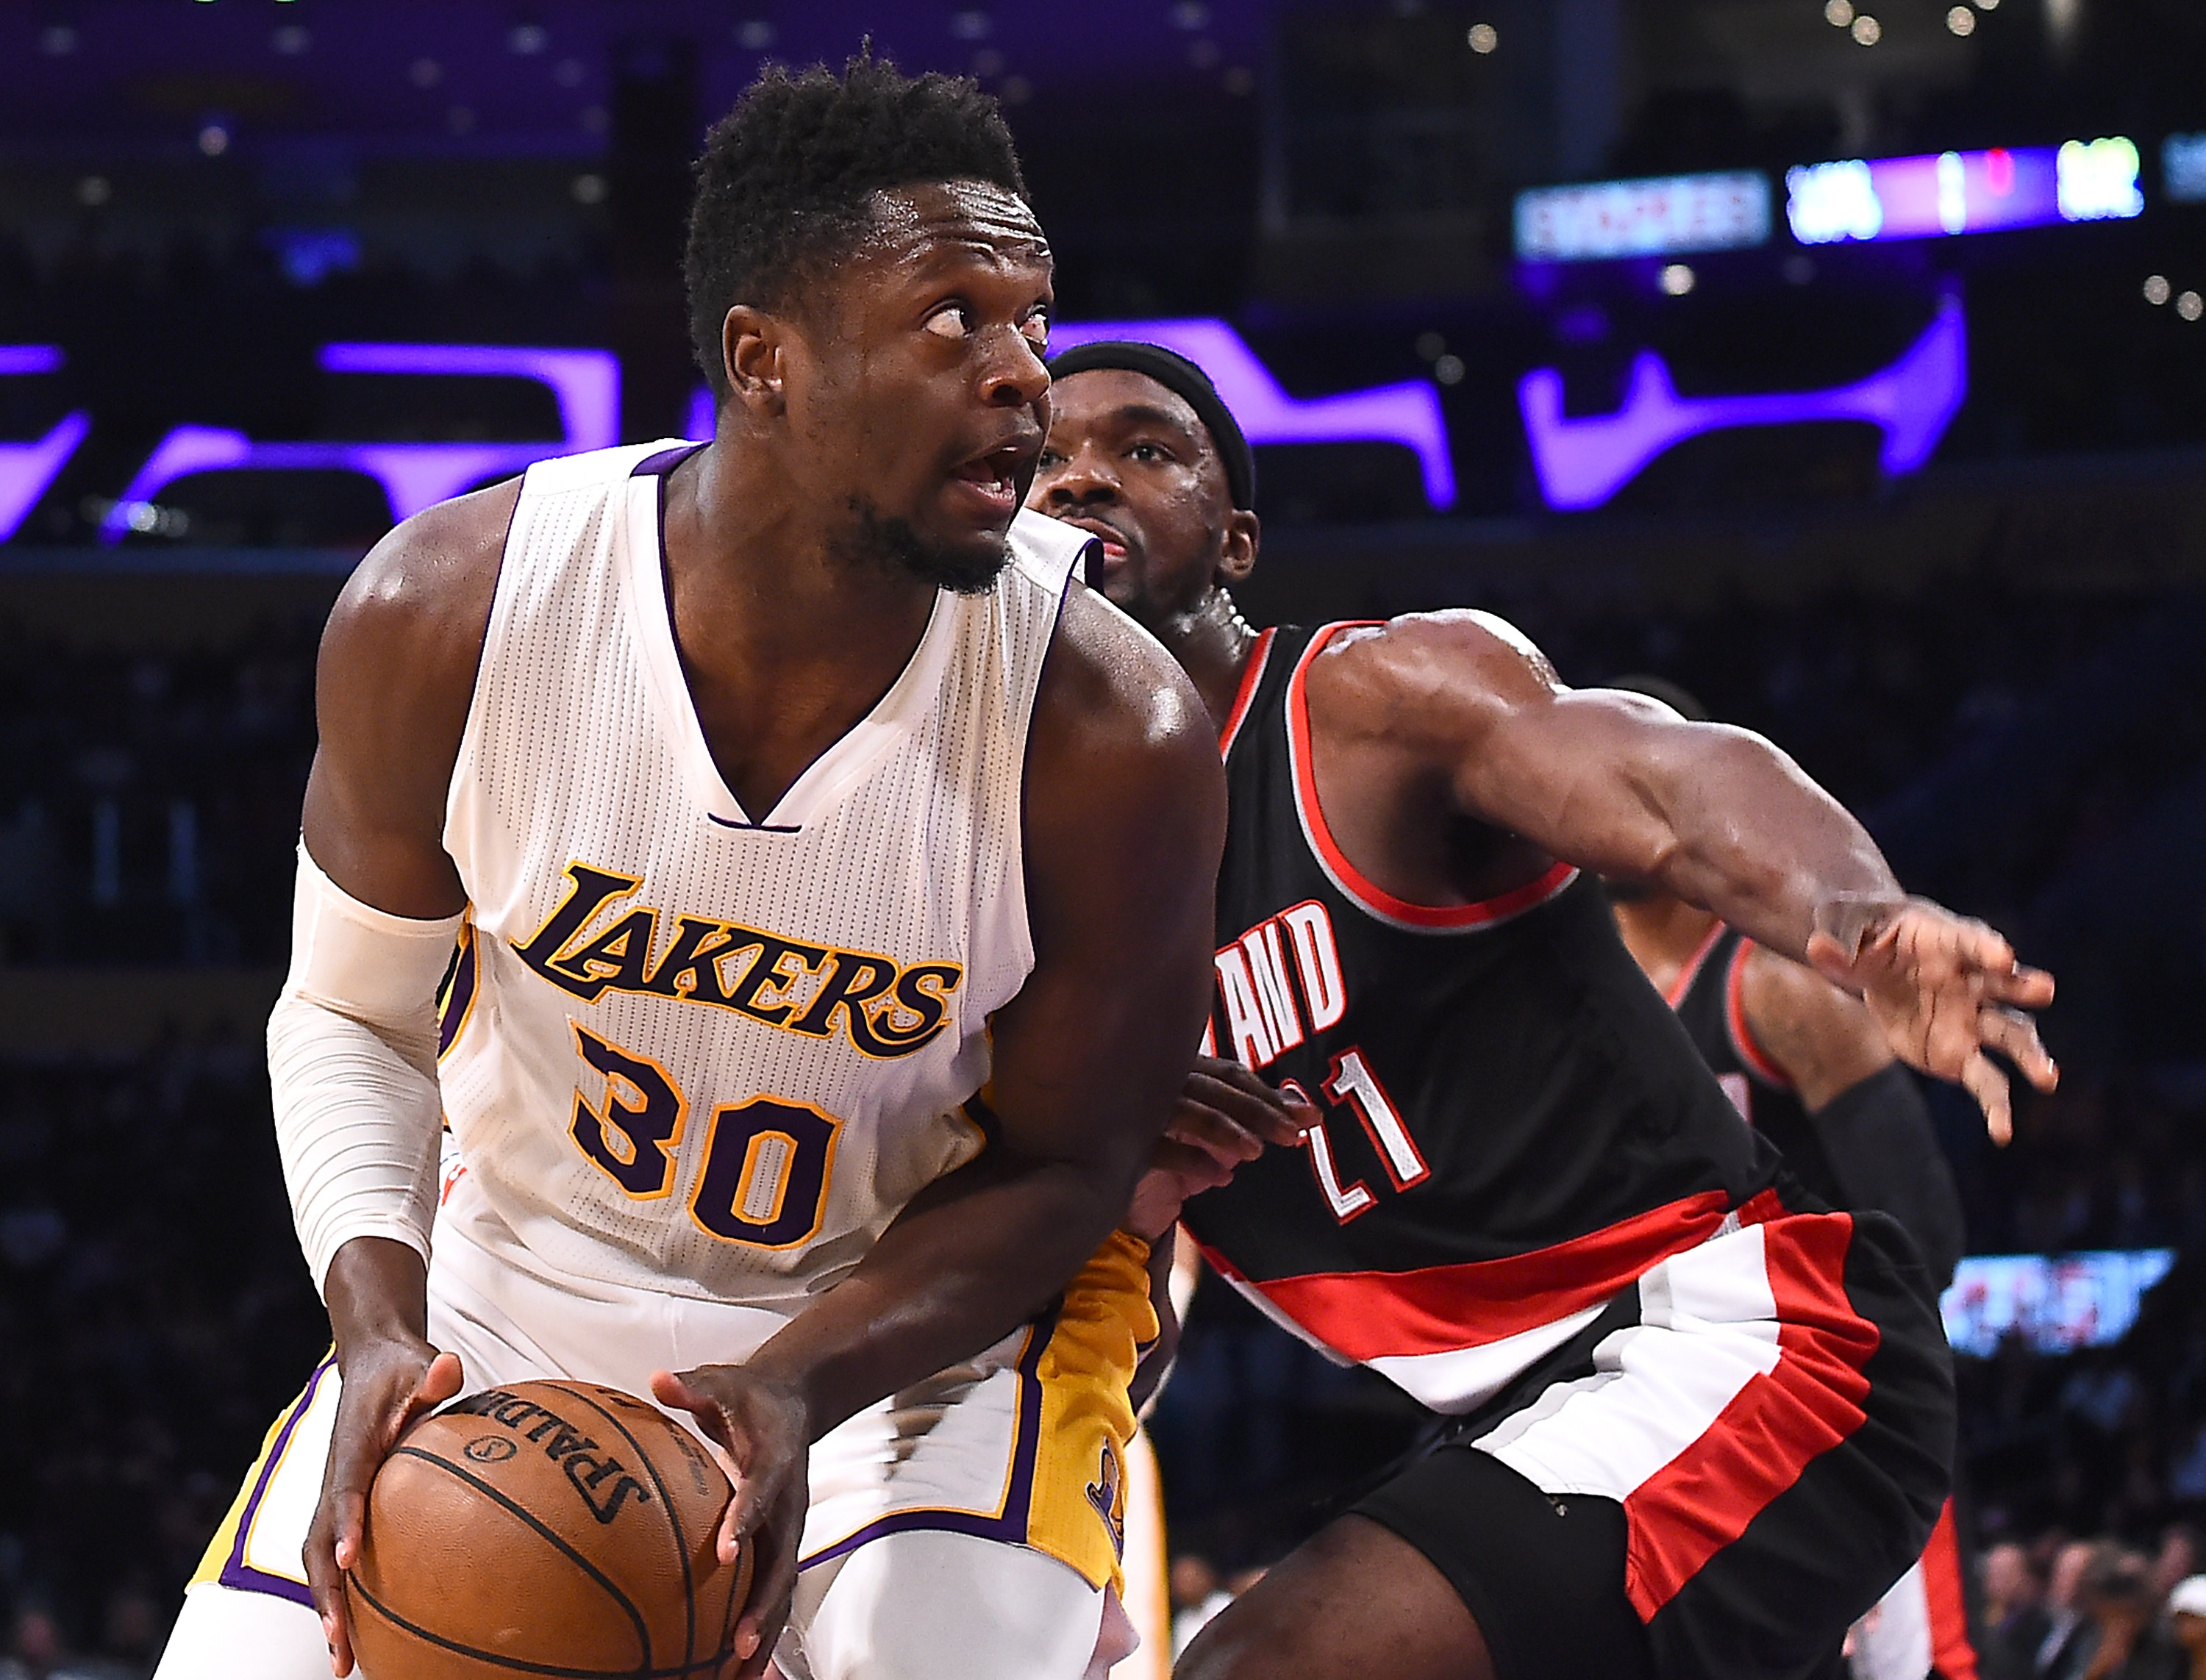 Los Angeles Lakers vs Portland Trail Blazers How to watch NBA online